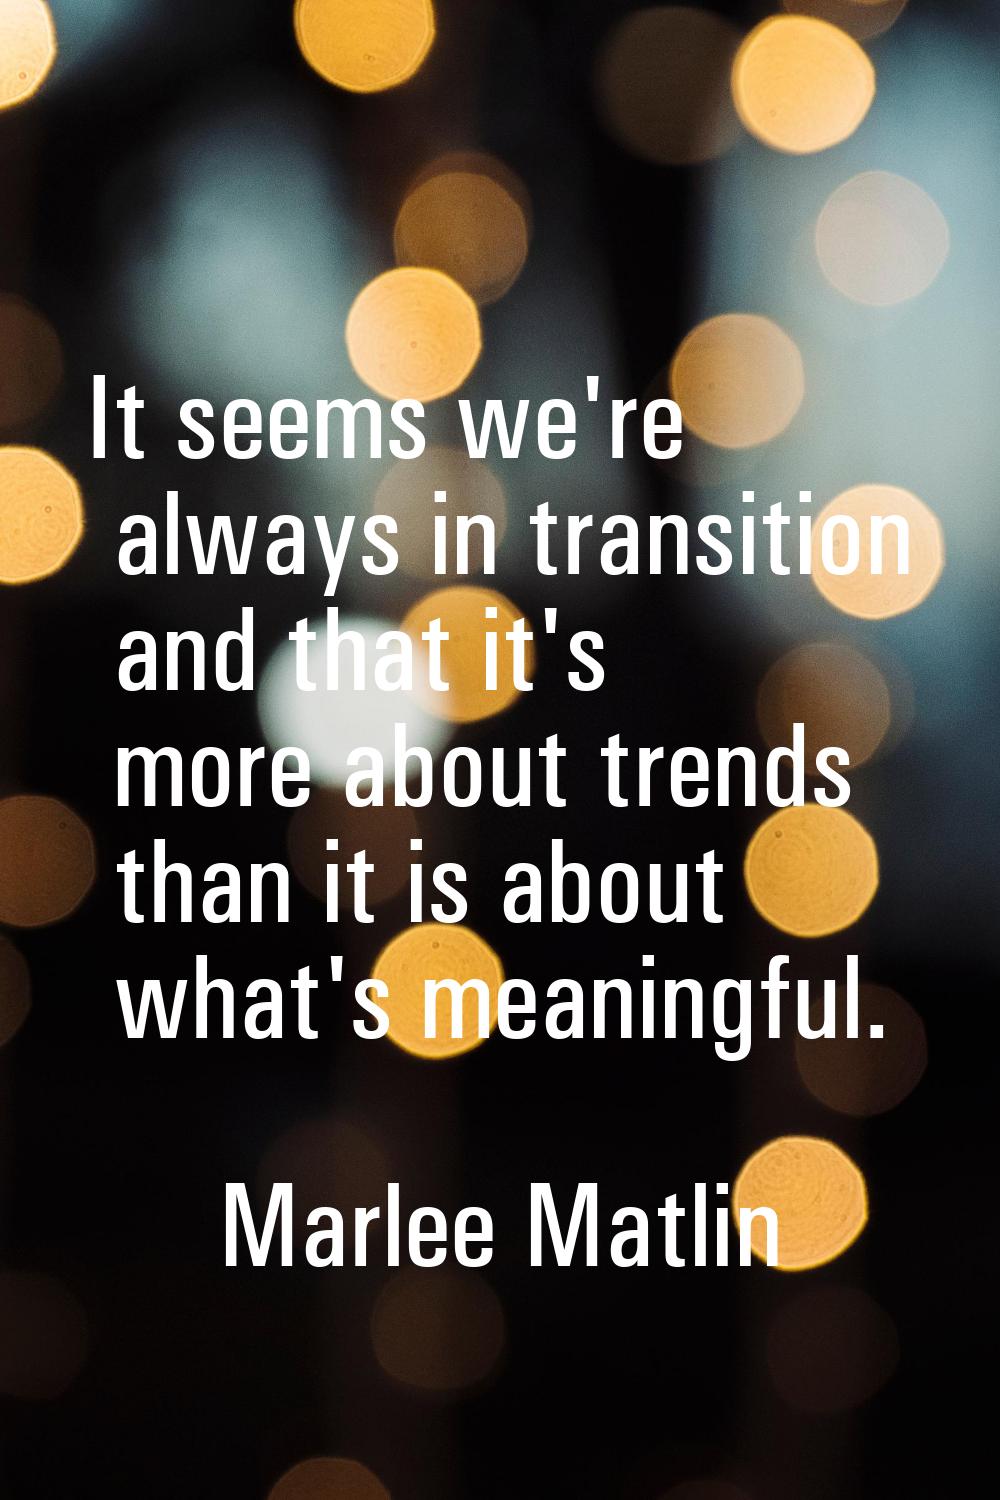 It seems we're always in transition and that it's more about trends than it is about what's meaning